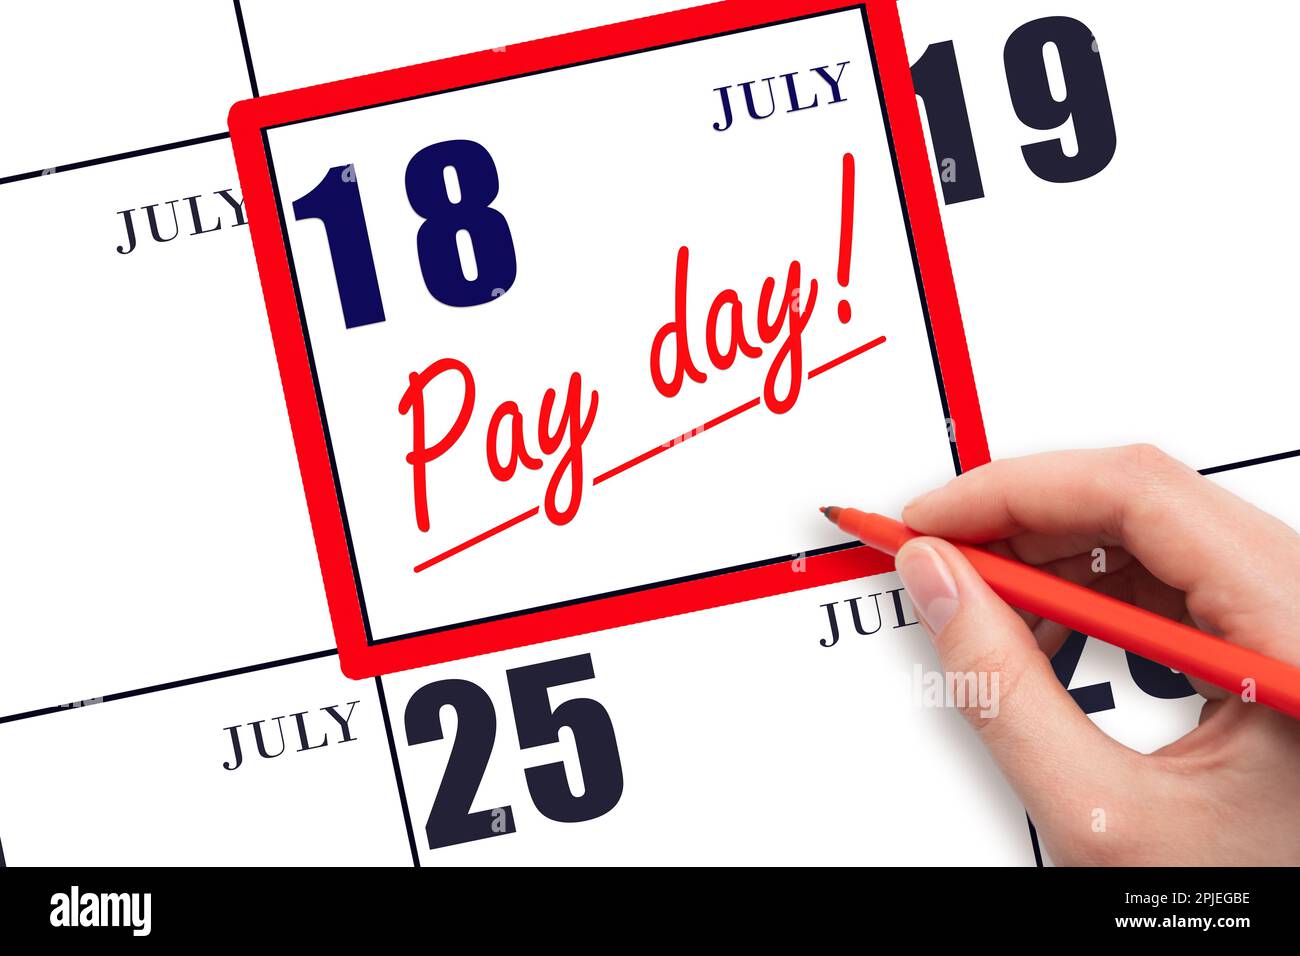 18th day of July. Hand writing text PAY DATE on calendar date July 18 and underline it. Payment due date.  Reminder concept of payment. Summer month, Stock Photo